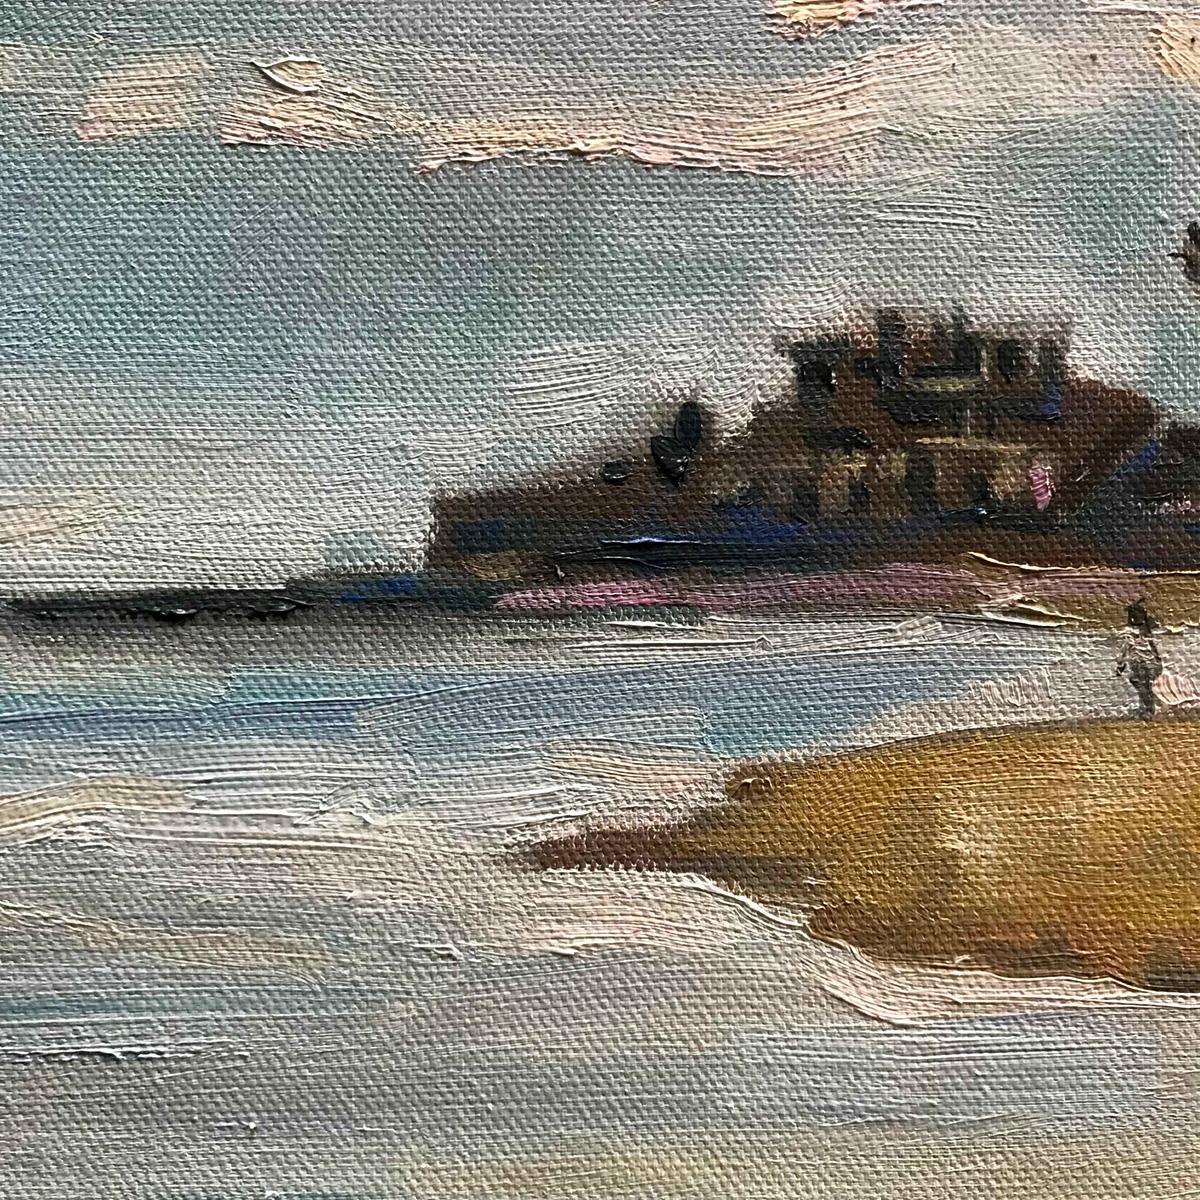 La Cala Beach, 2 is an Original Painting by Eleanor Woolley. This Painting looks South West along la Cala beach. The building meeting the shoreline are in shadow, turning mauve and dusky pink. People stroll along the waters edge, their footsteps can